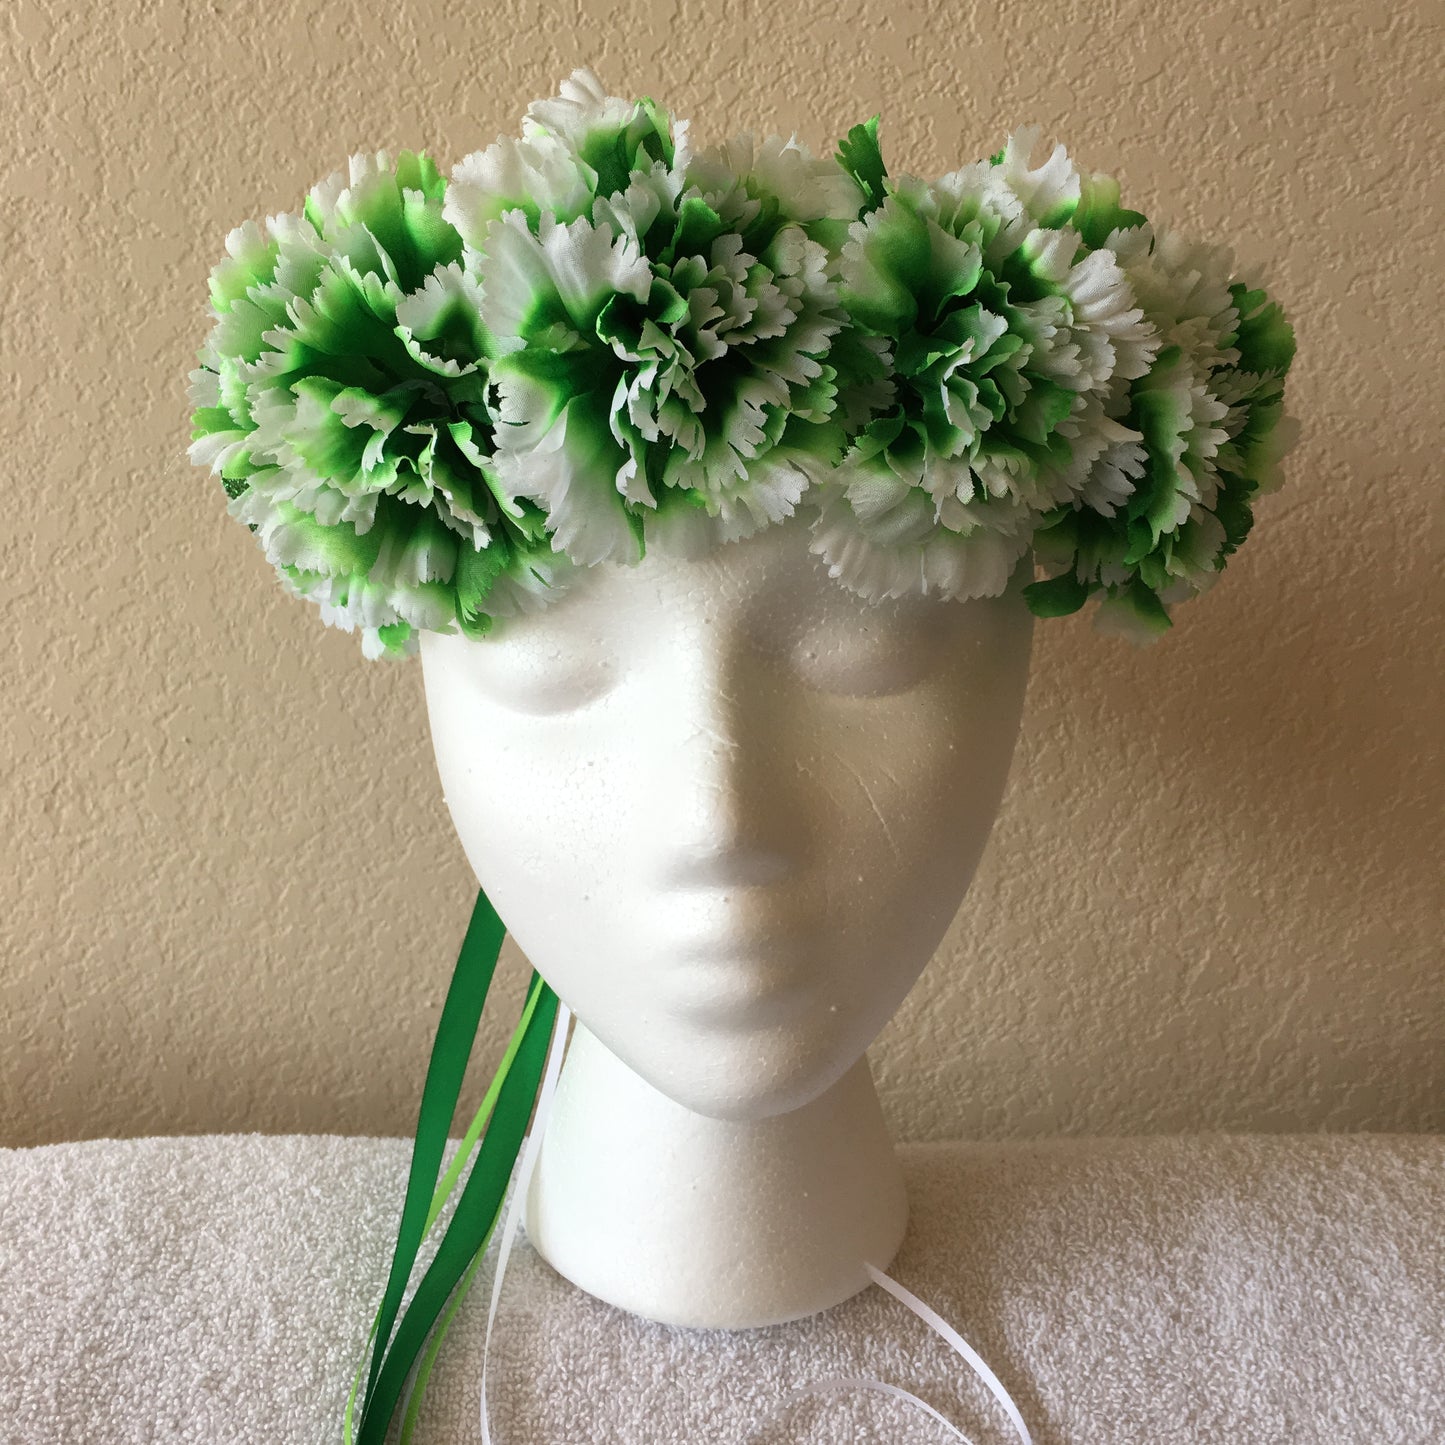 Show Special Wreath - Green & white carnations w/ shamrock accent